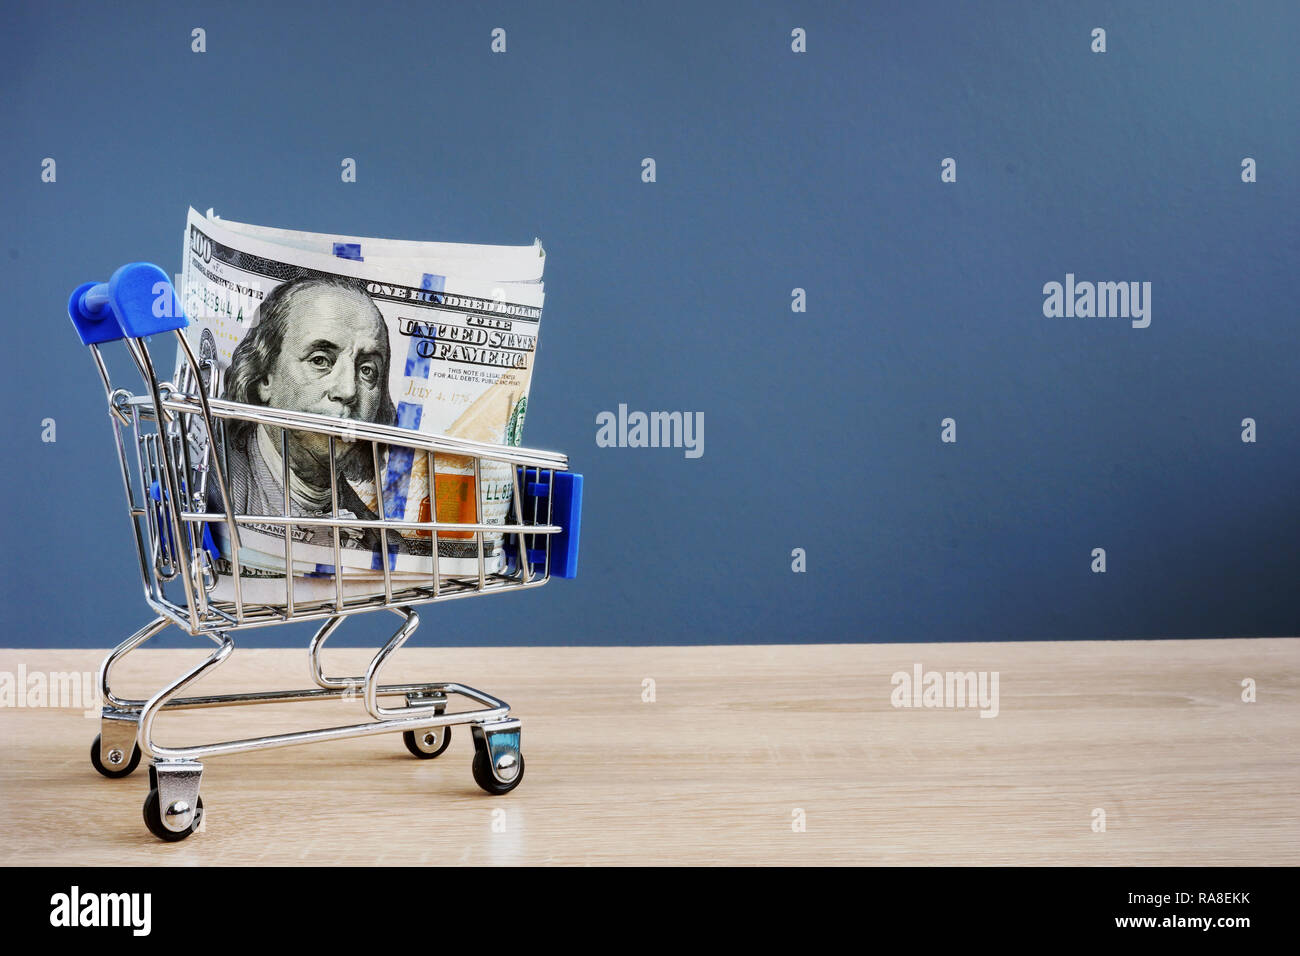 Shopping cart with money. Instant cash loans. Copy space. Stock Photo